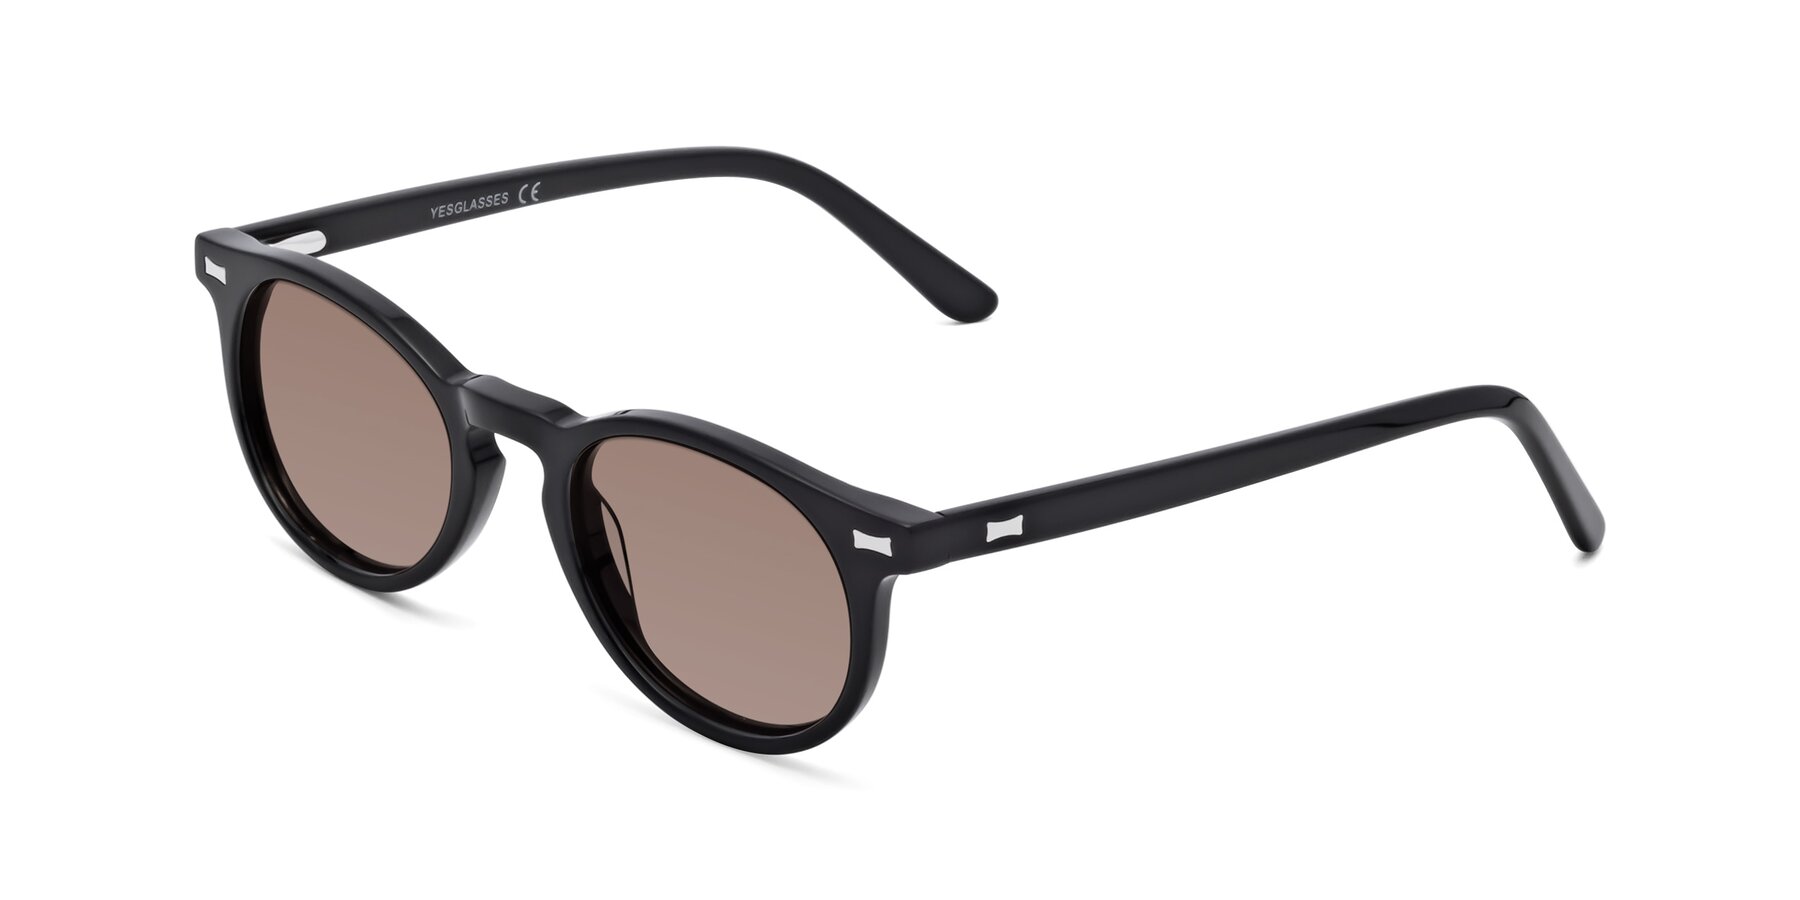 Angle of 17330 in Black with Medium Brown Tinted Lenses